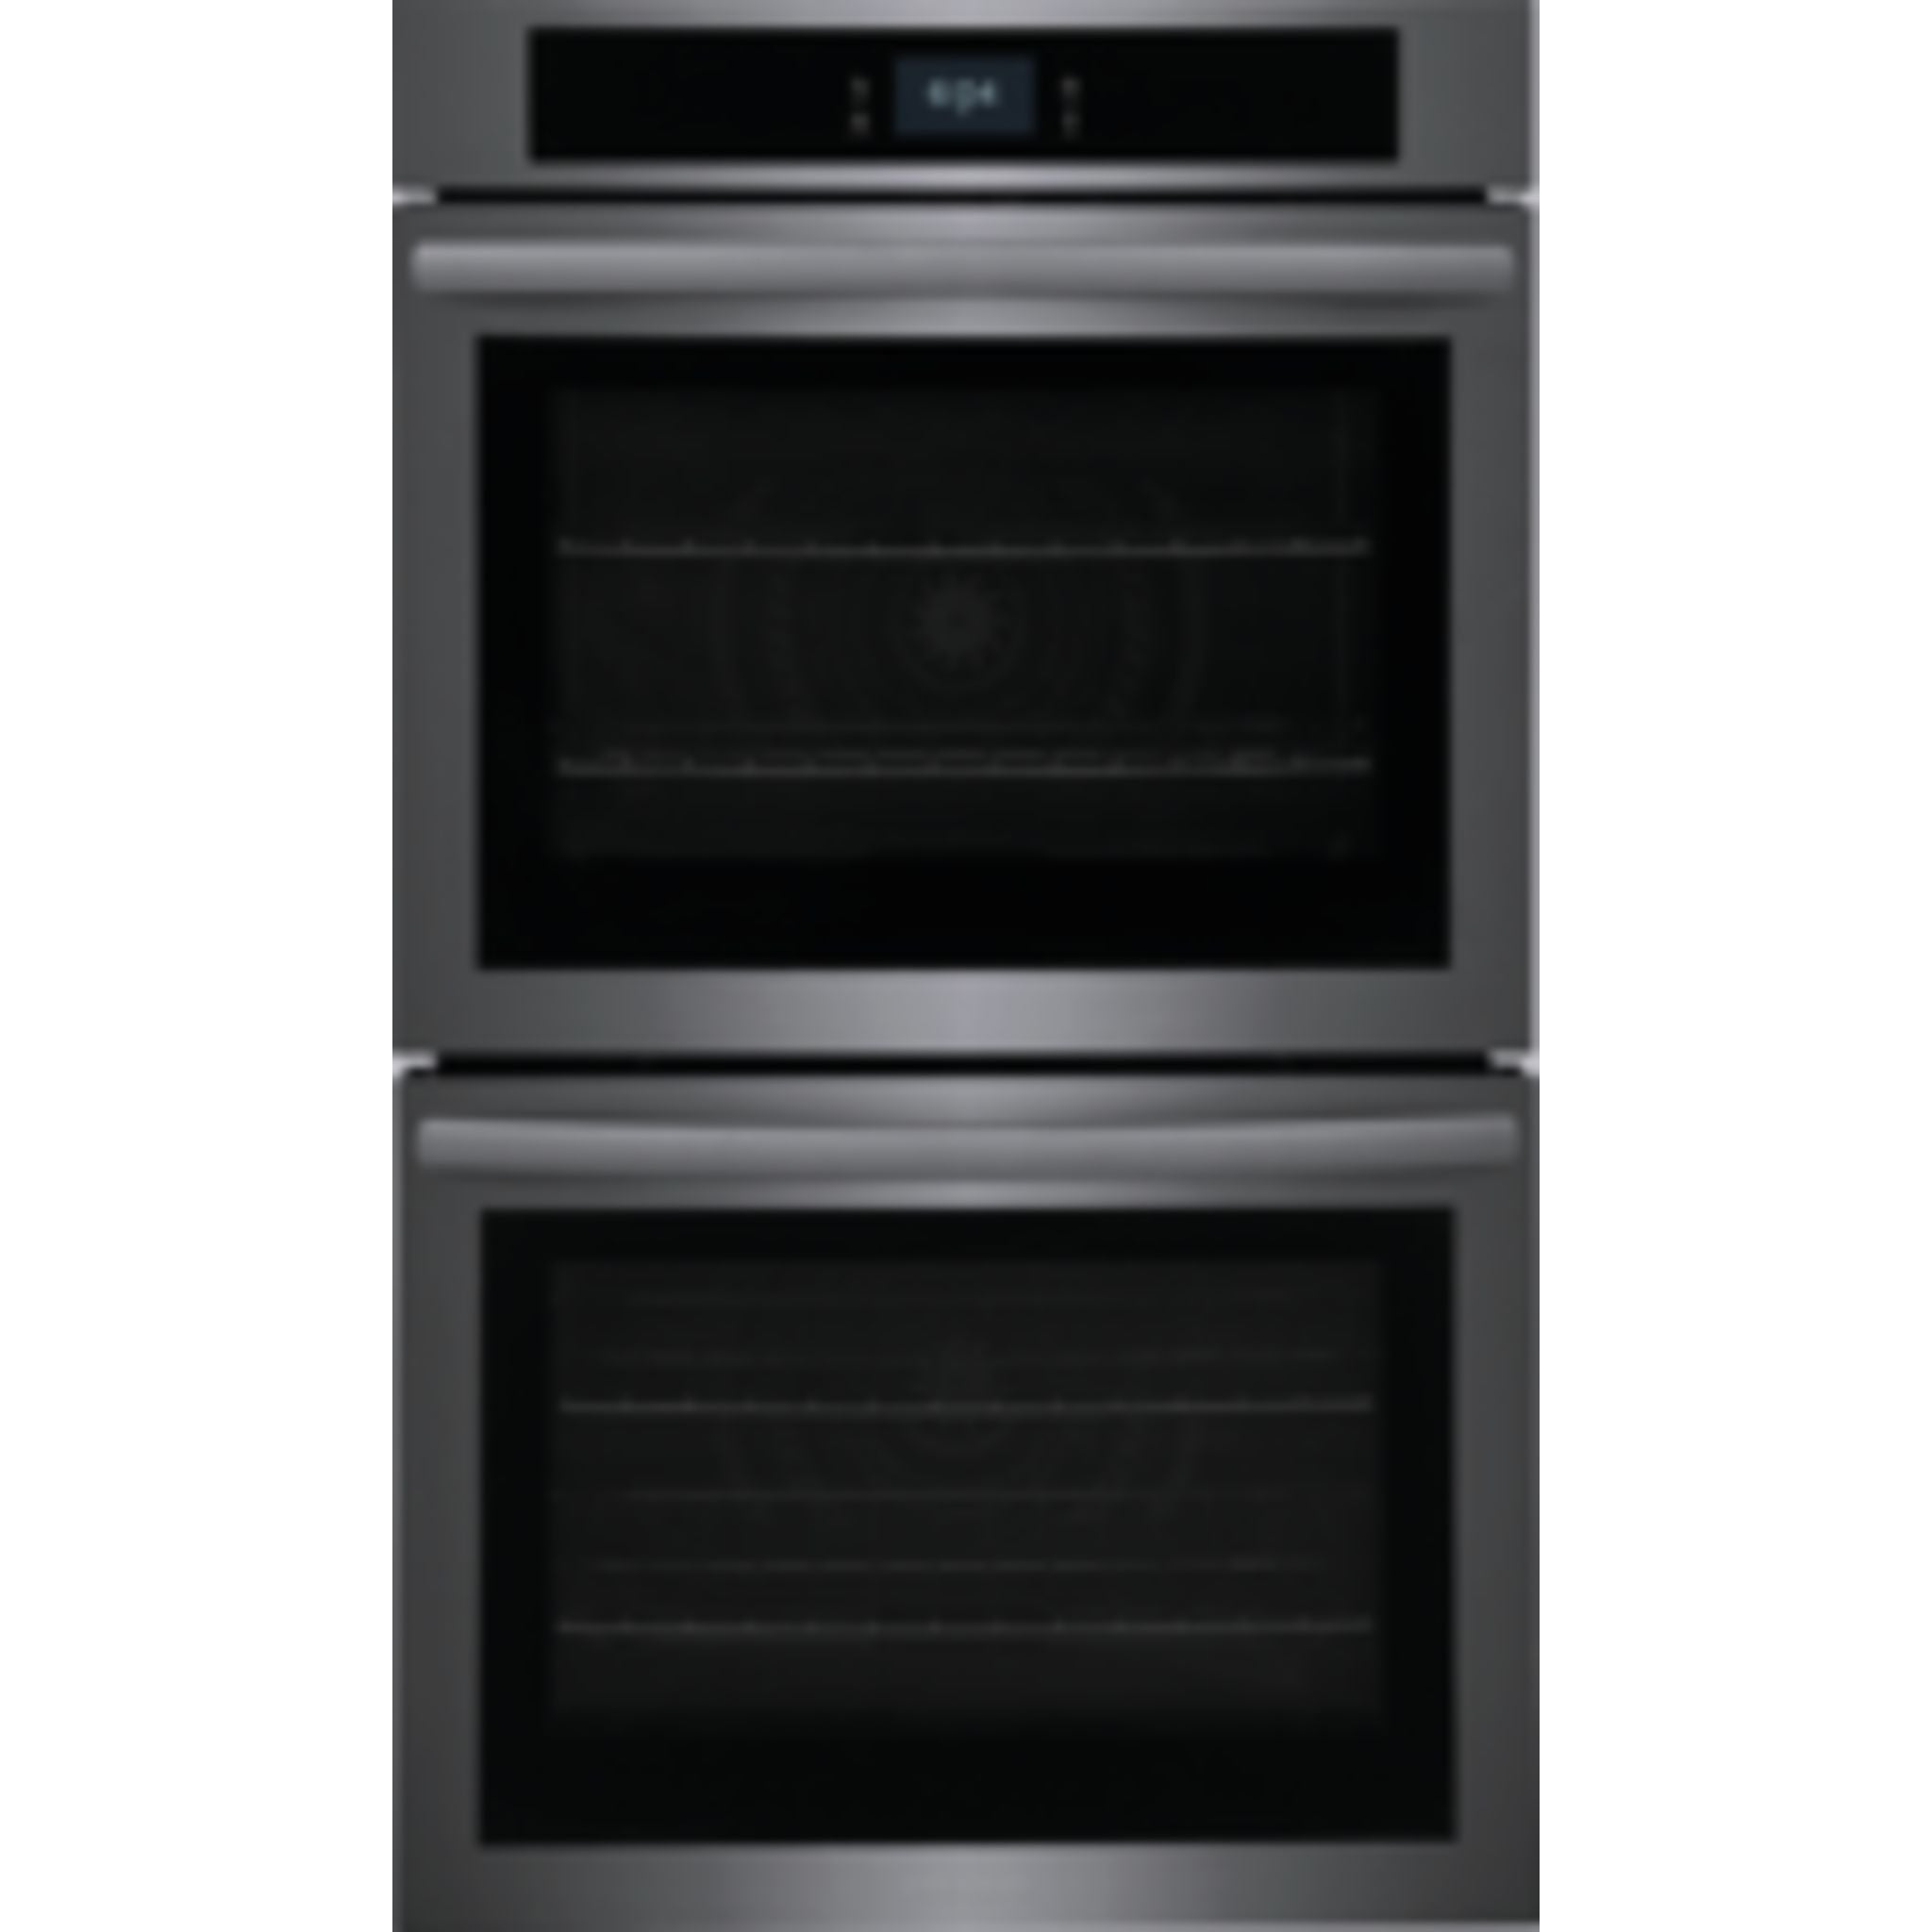 Frigidaire, Frigidaire 30" Convection Wall Oven (FCWD3027AD) - Black Stainless